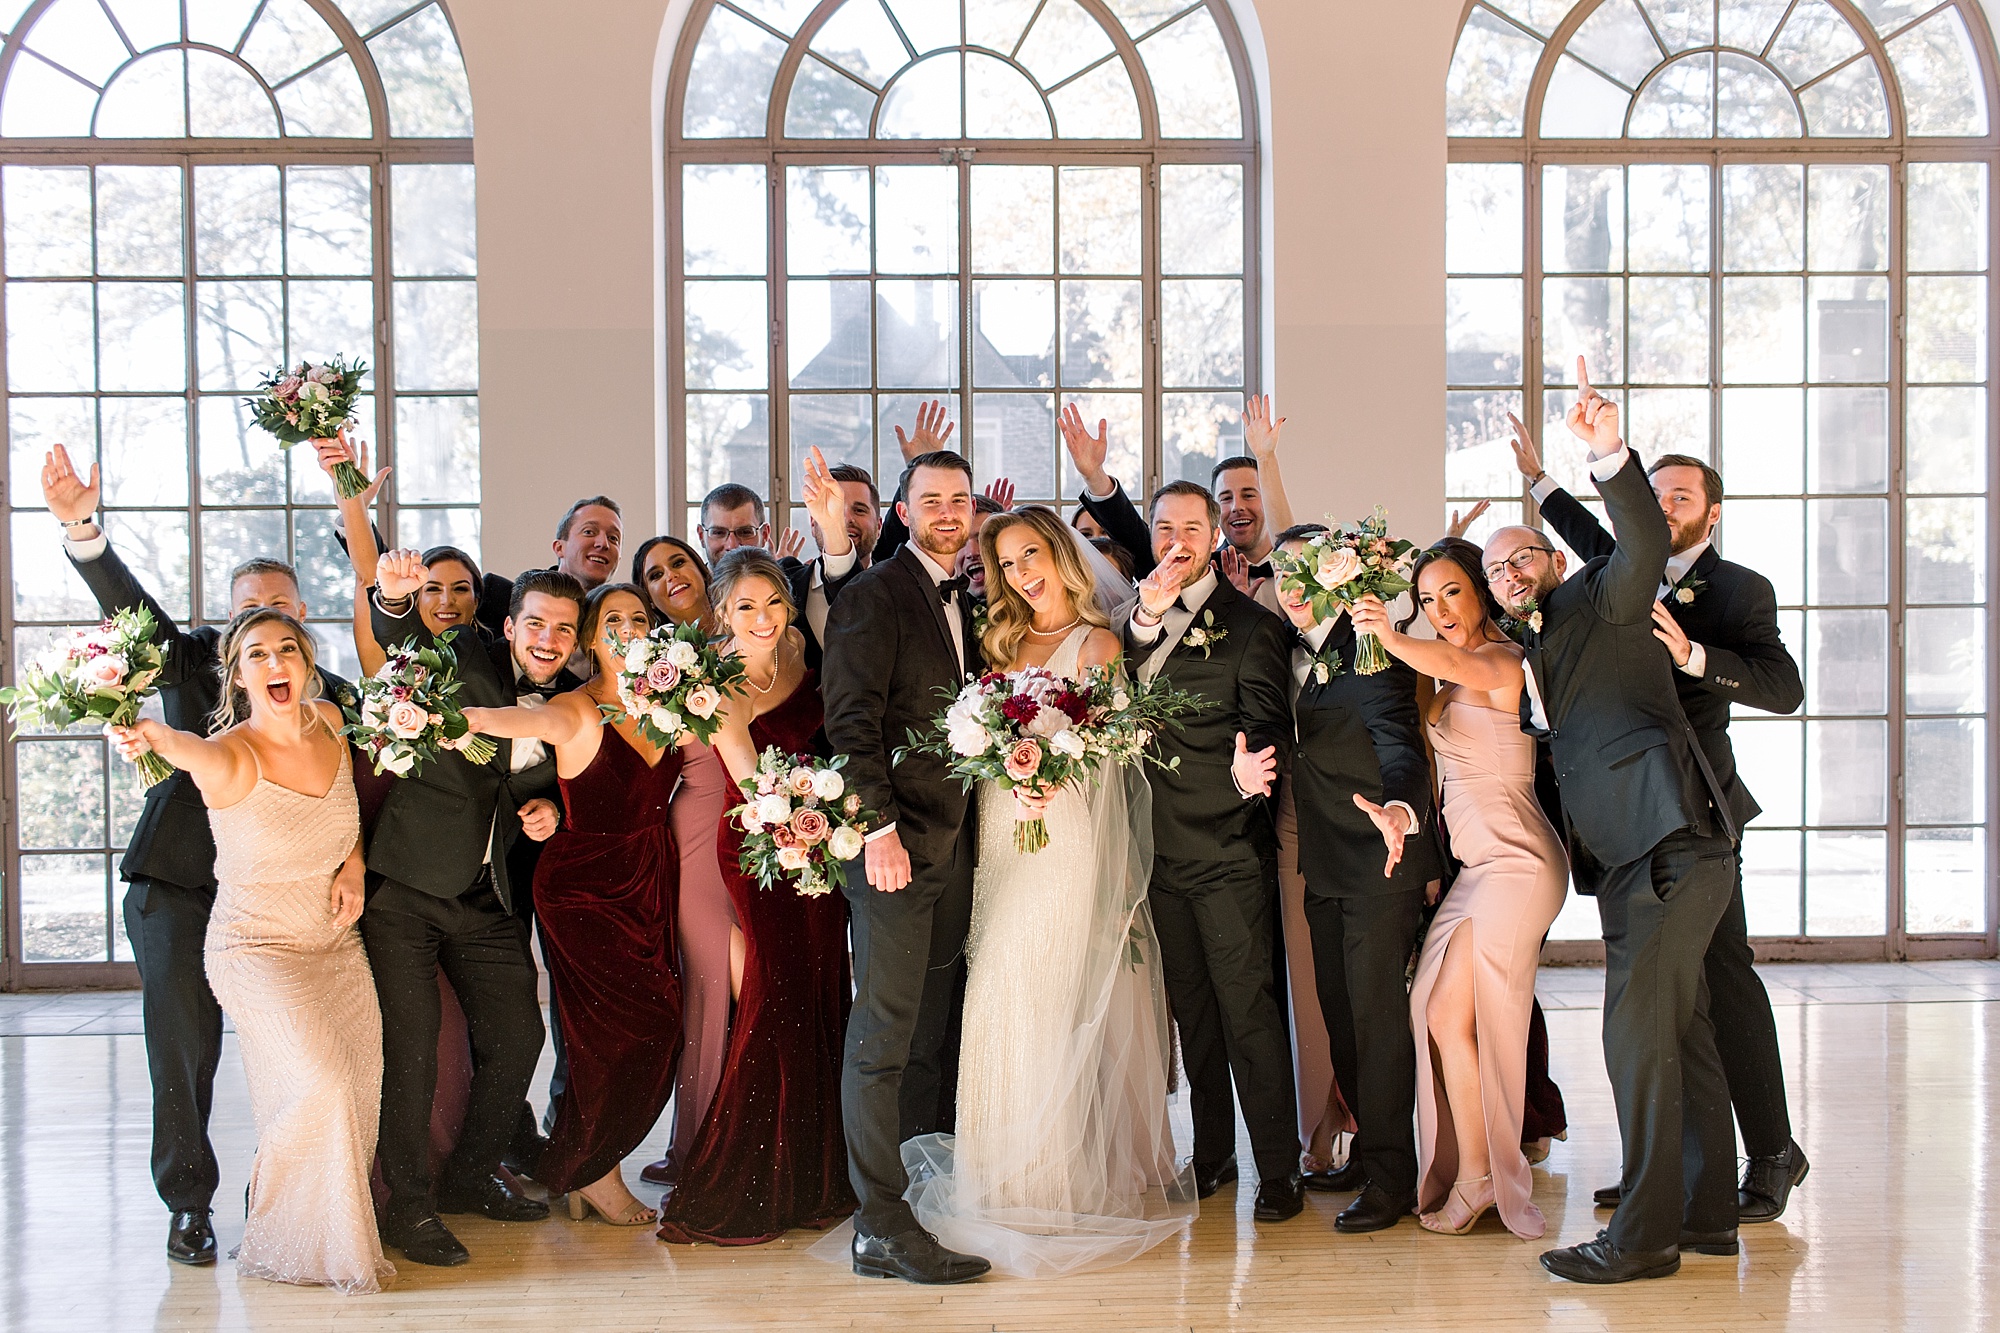 bride and groom stand cheering with bridesmaids in pink dresses and groomsmen in suits 